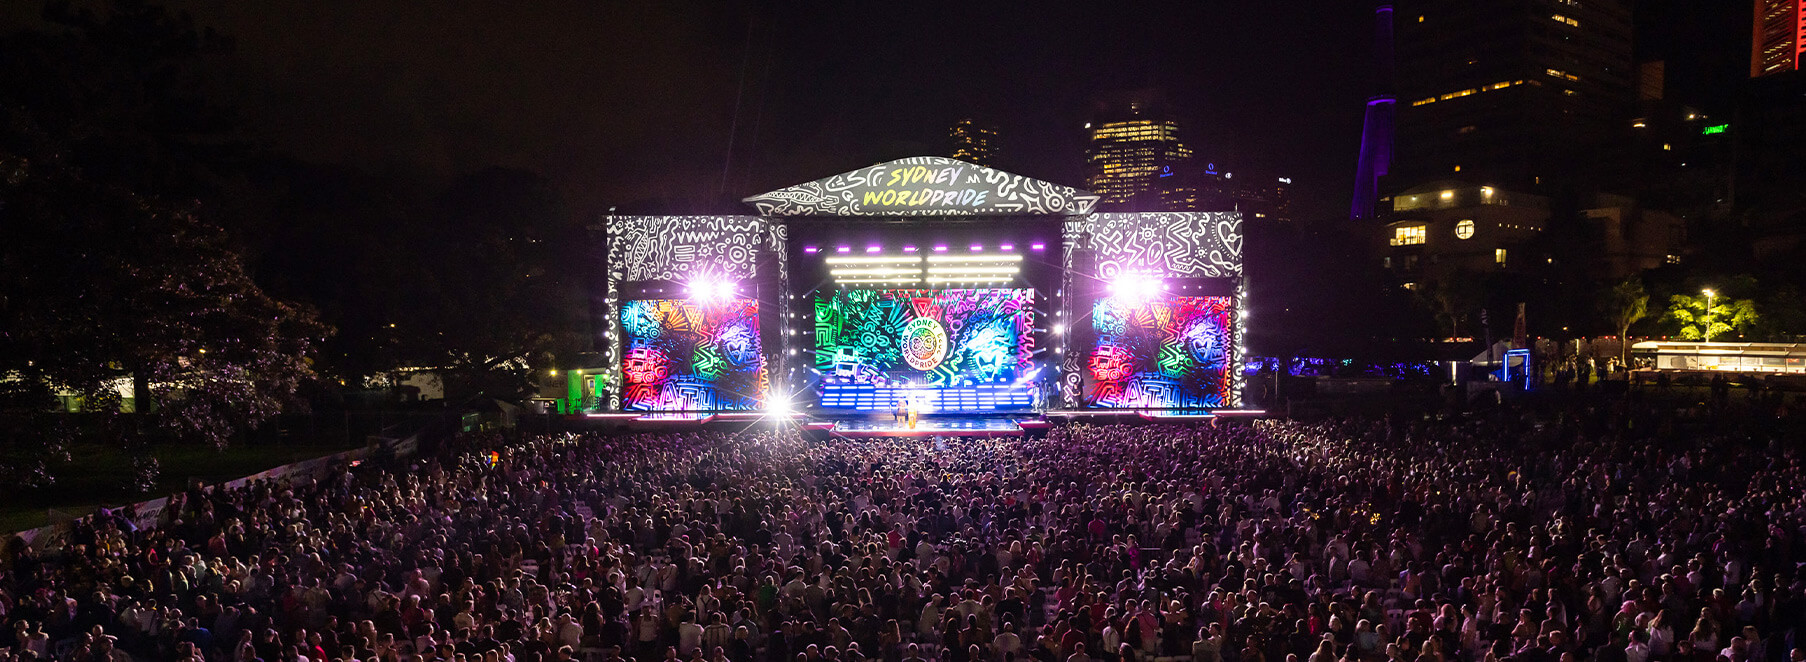 WorldPride stage at night, with thousands of people around it. Credit: Daniel Boud